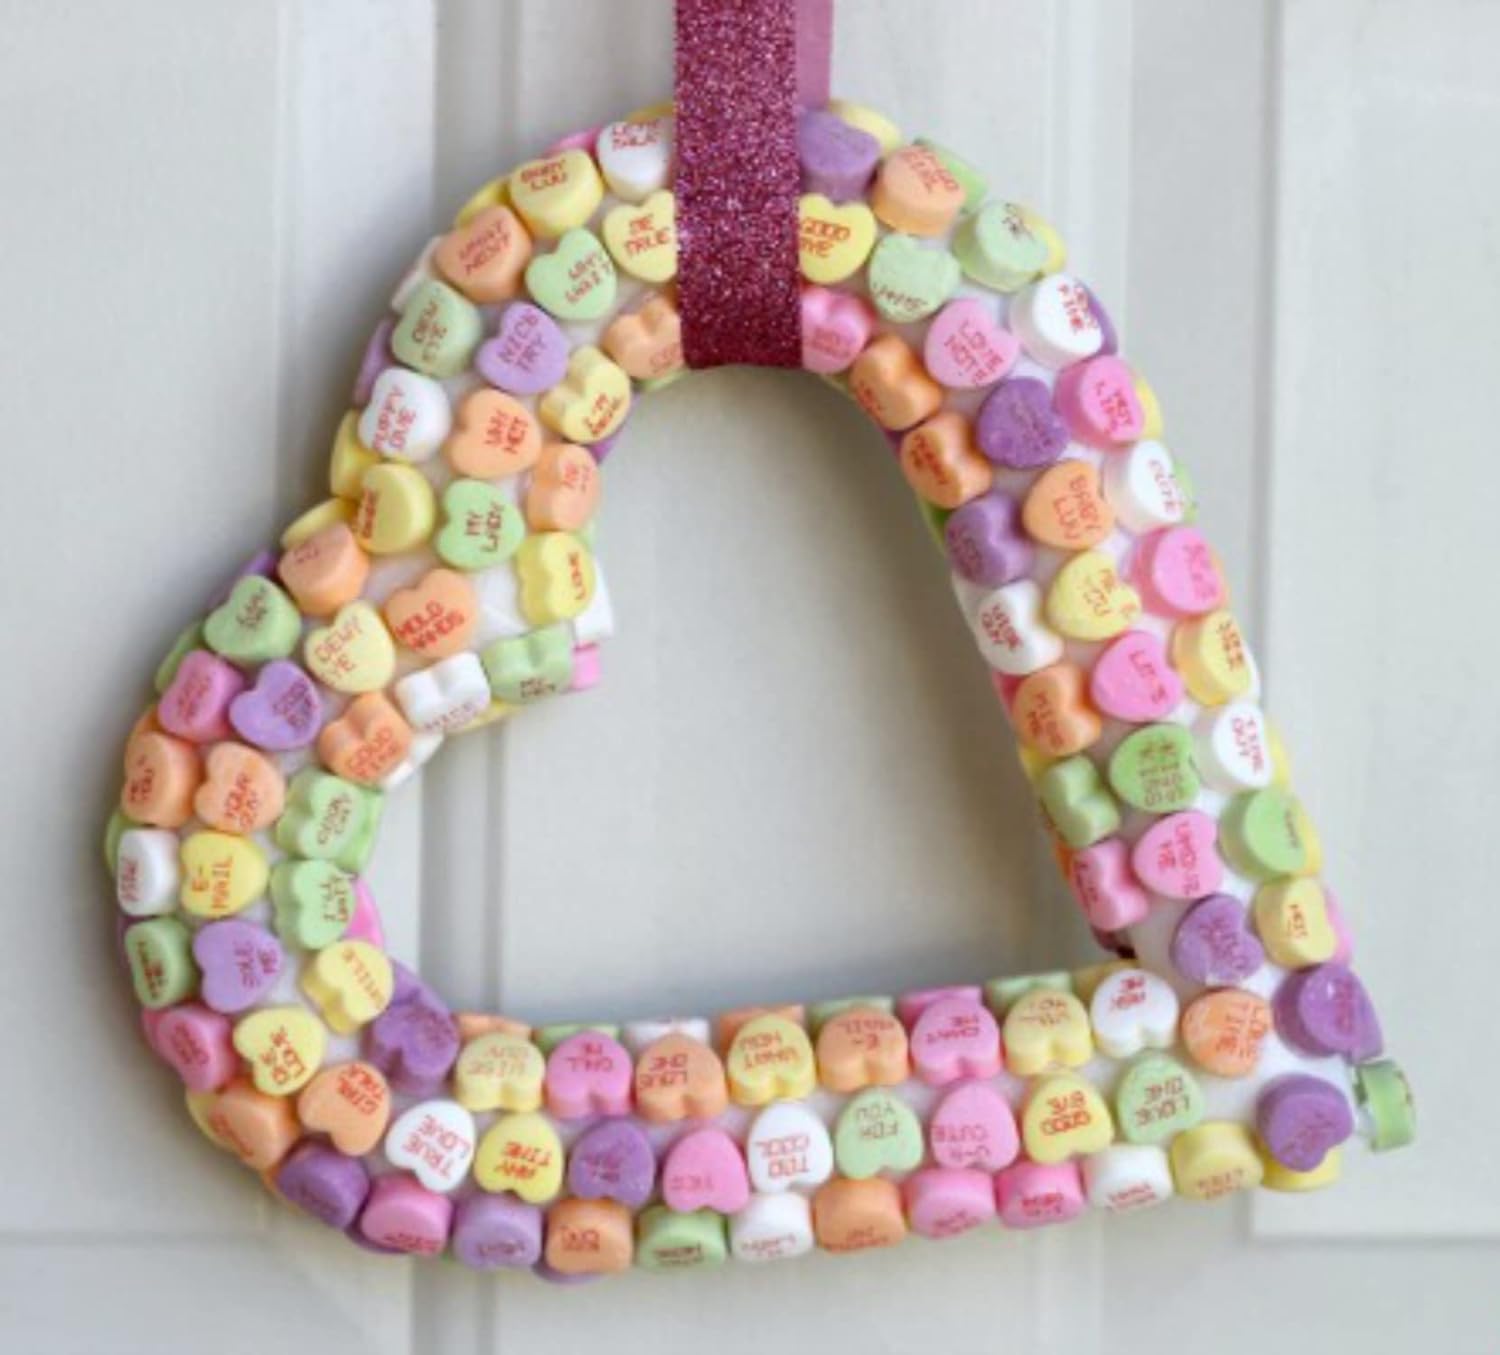 Small Candy Conversation Hearts, 5 Pound By The Cup Bag : Grocery & Gourmet Food